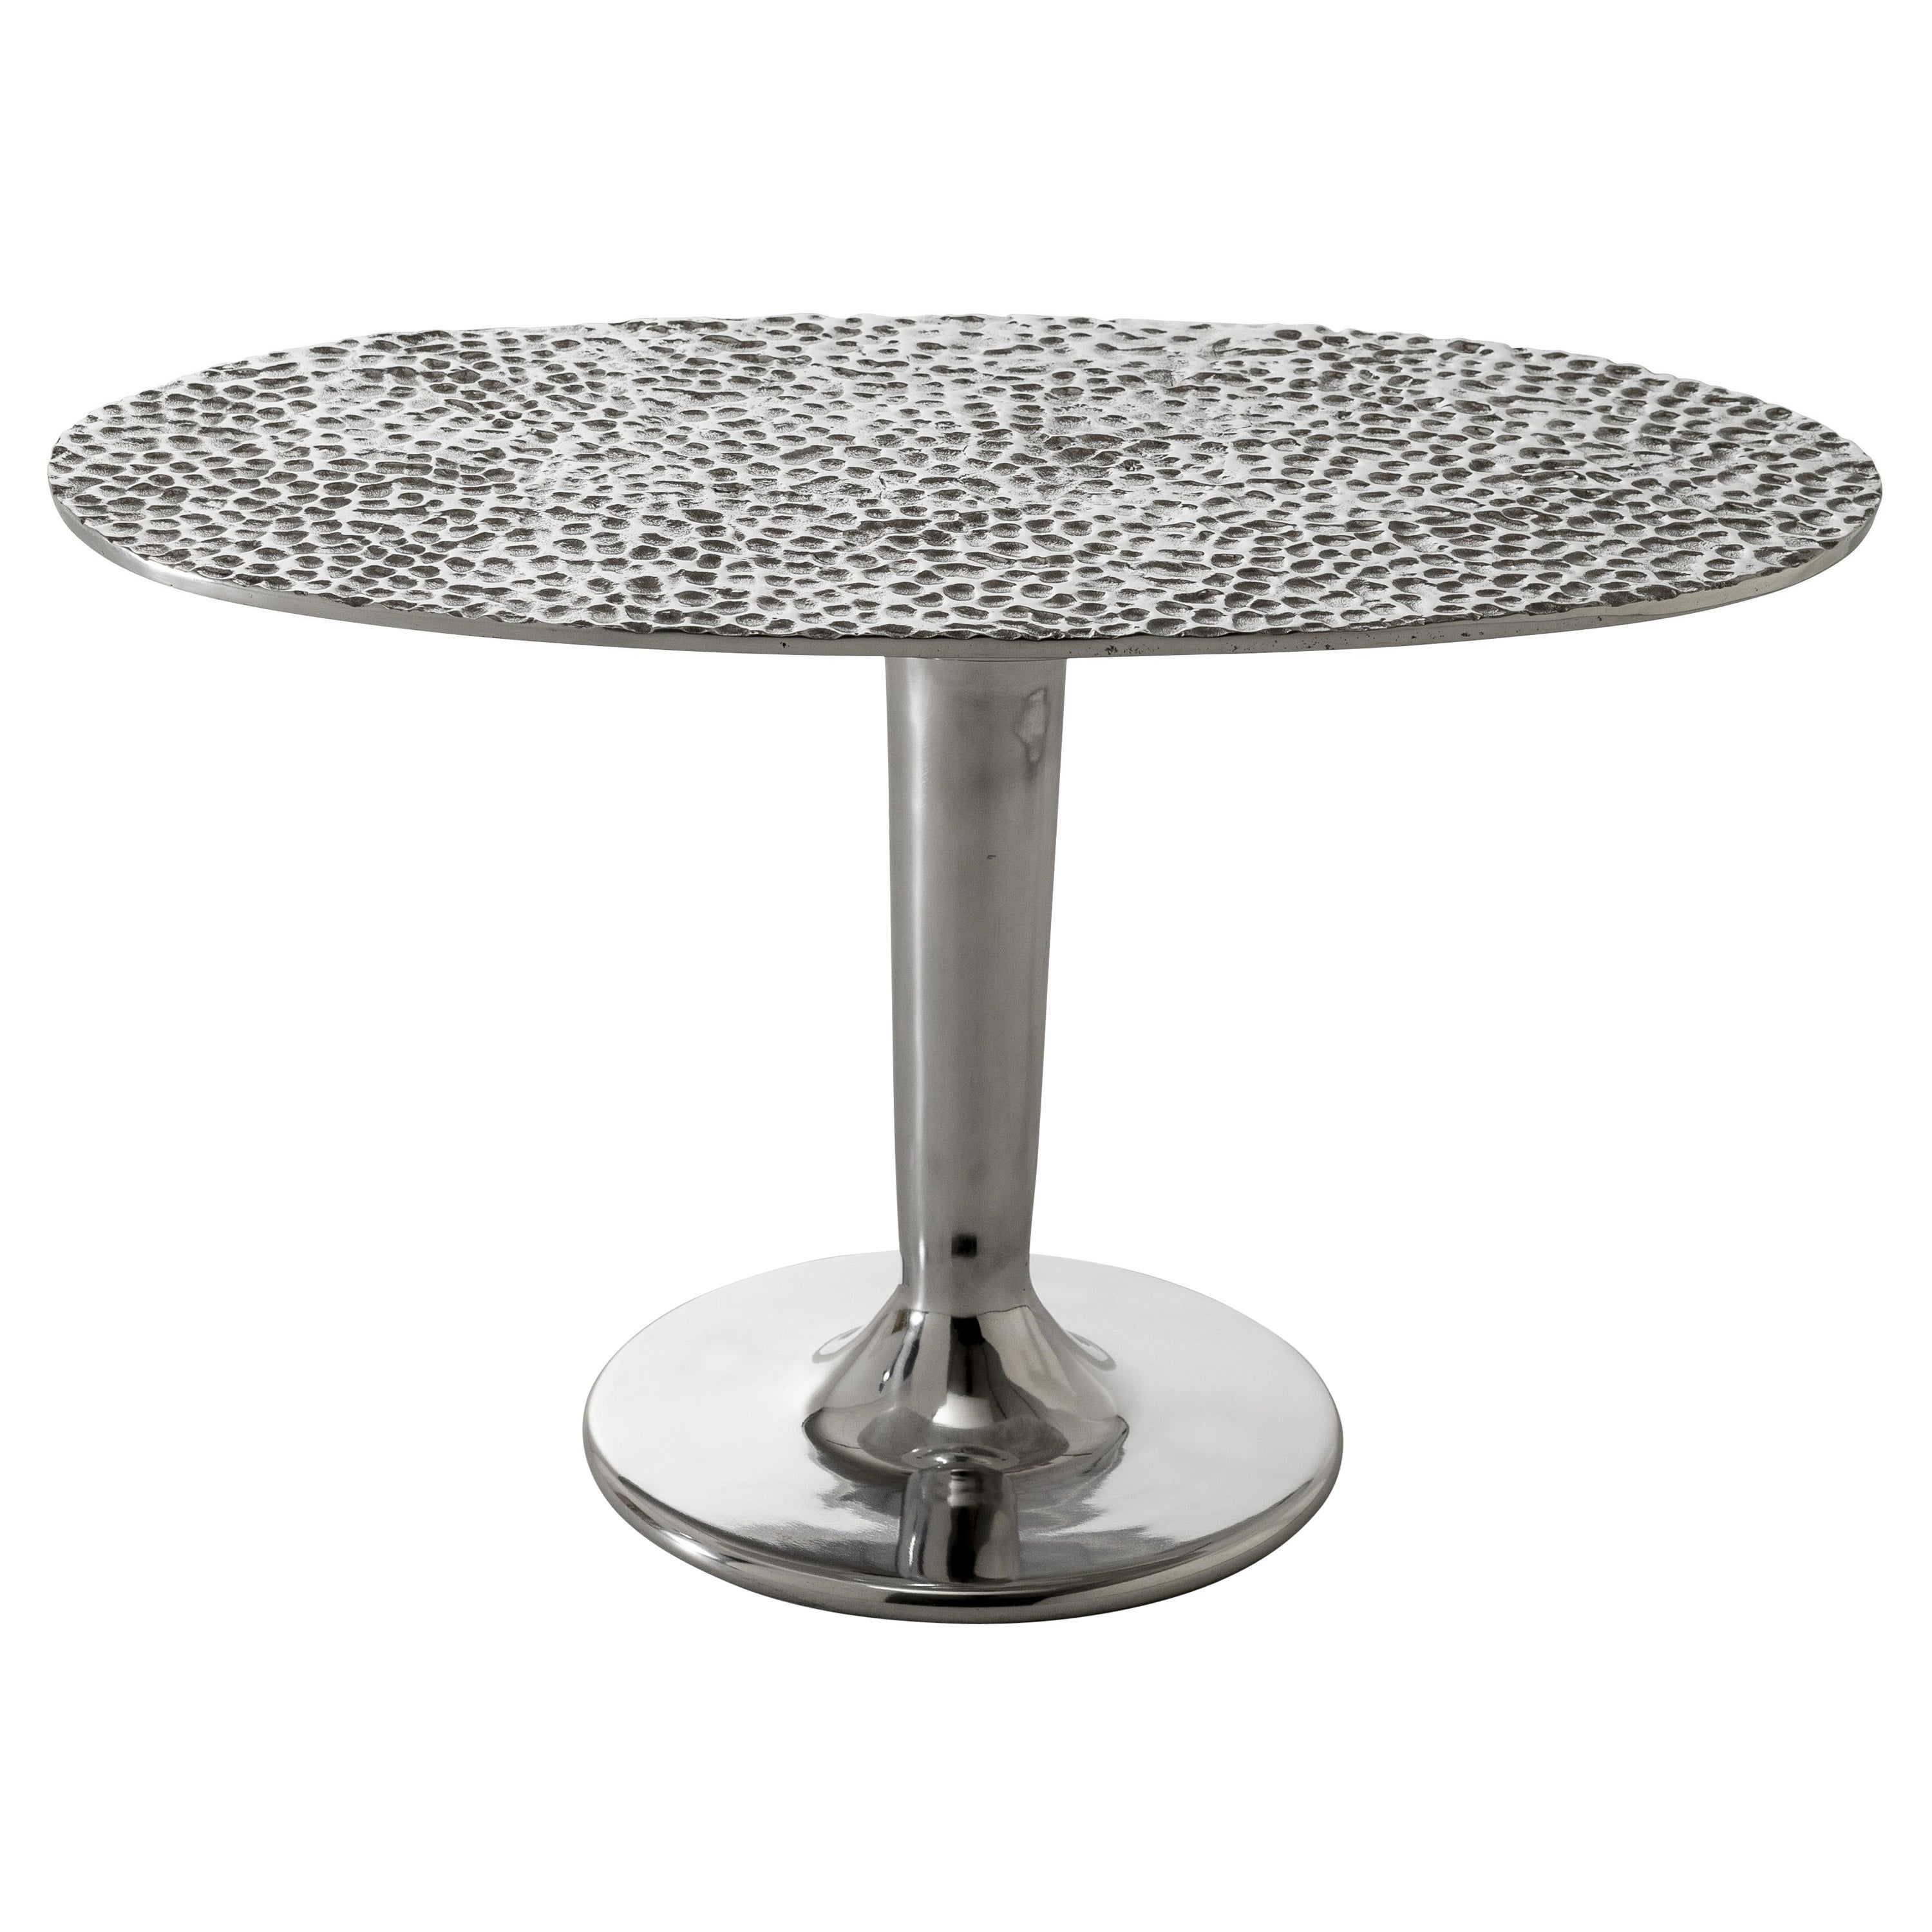 Gervasoni Next 147 Coffee Table in Cast Aluminium & Hammered Top by Paola Navone For Sale